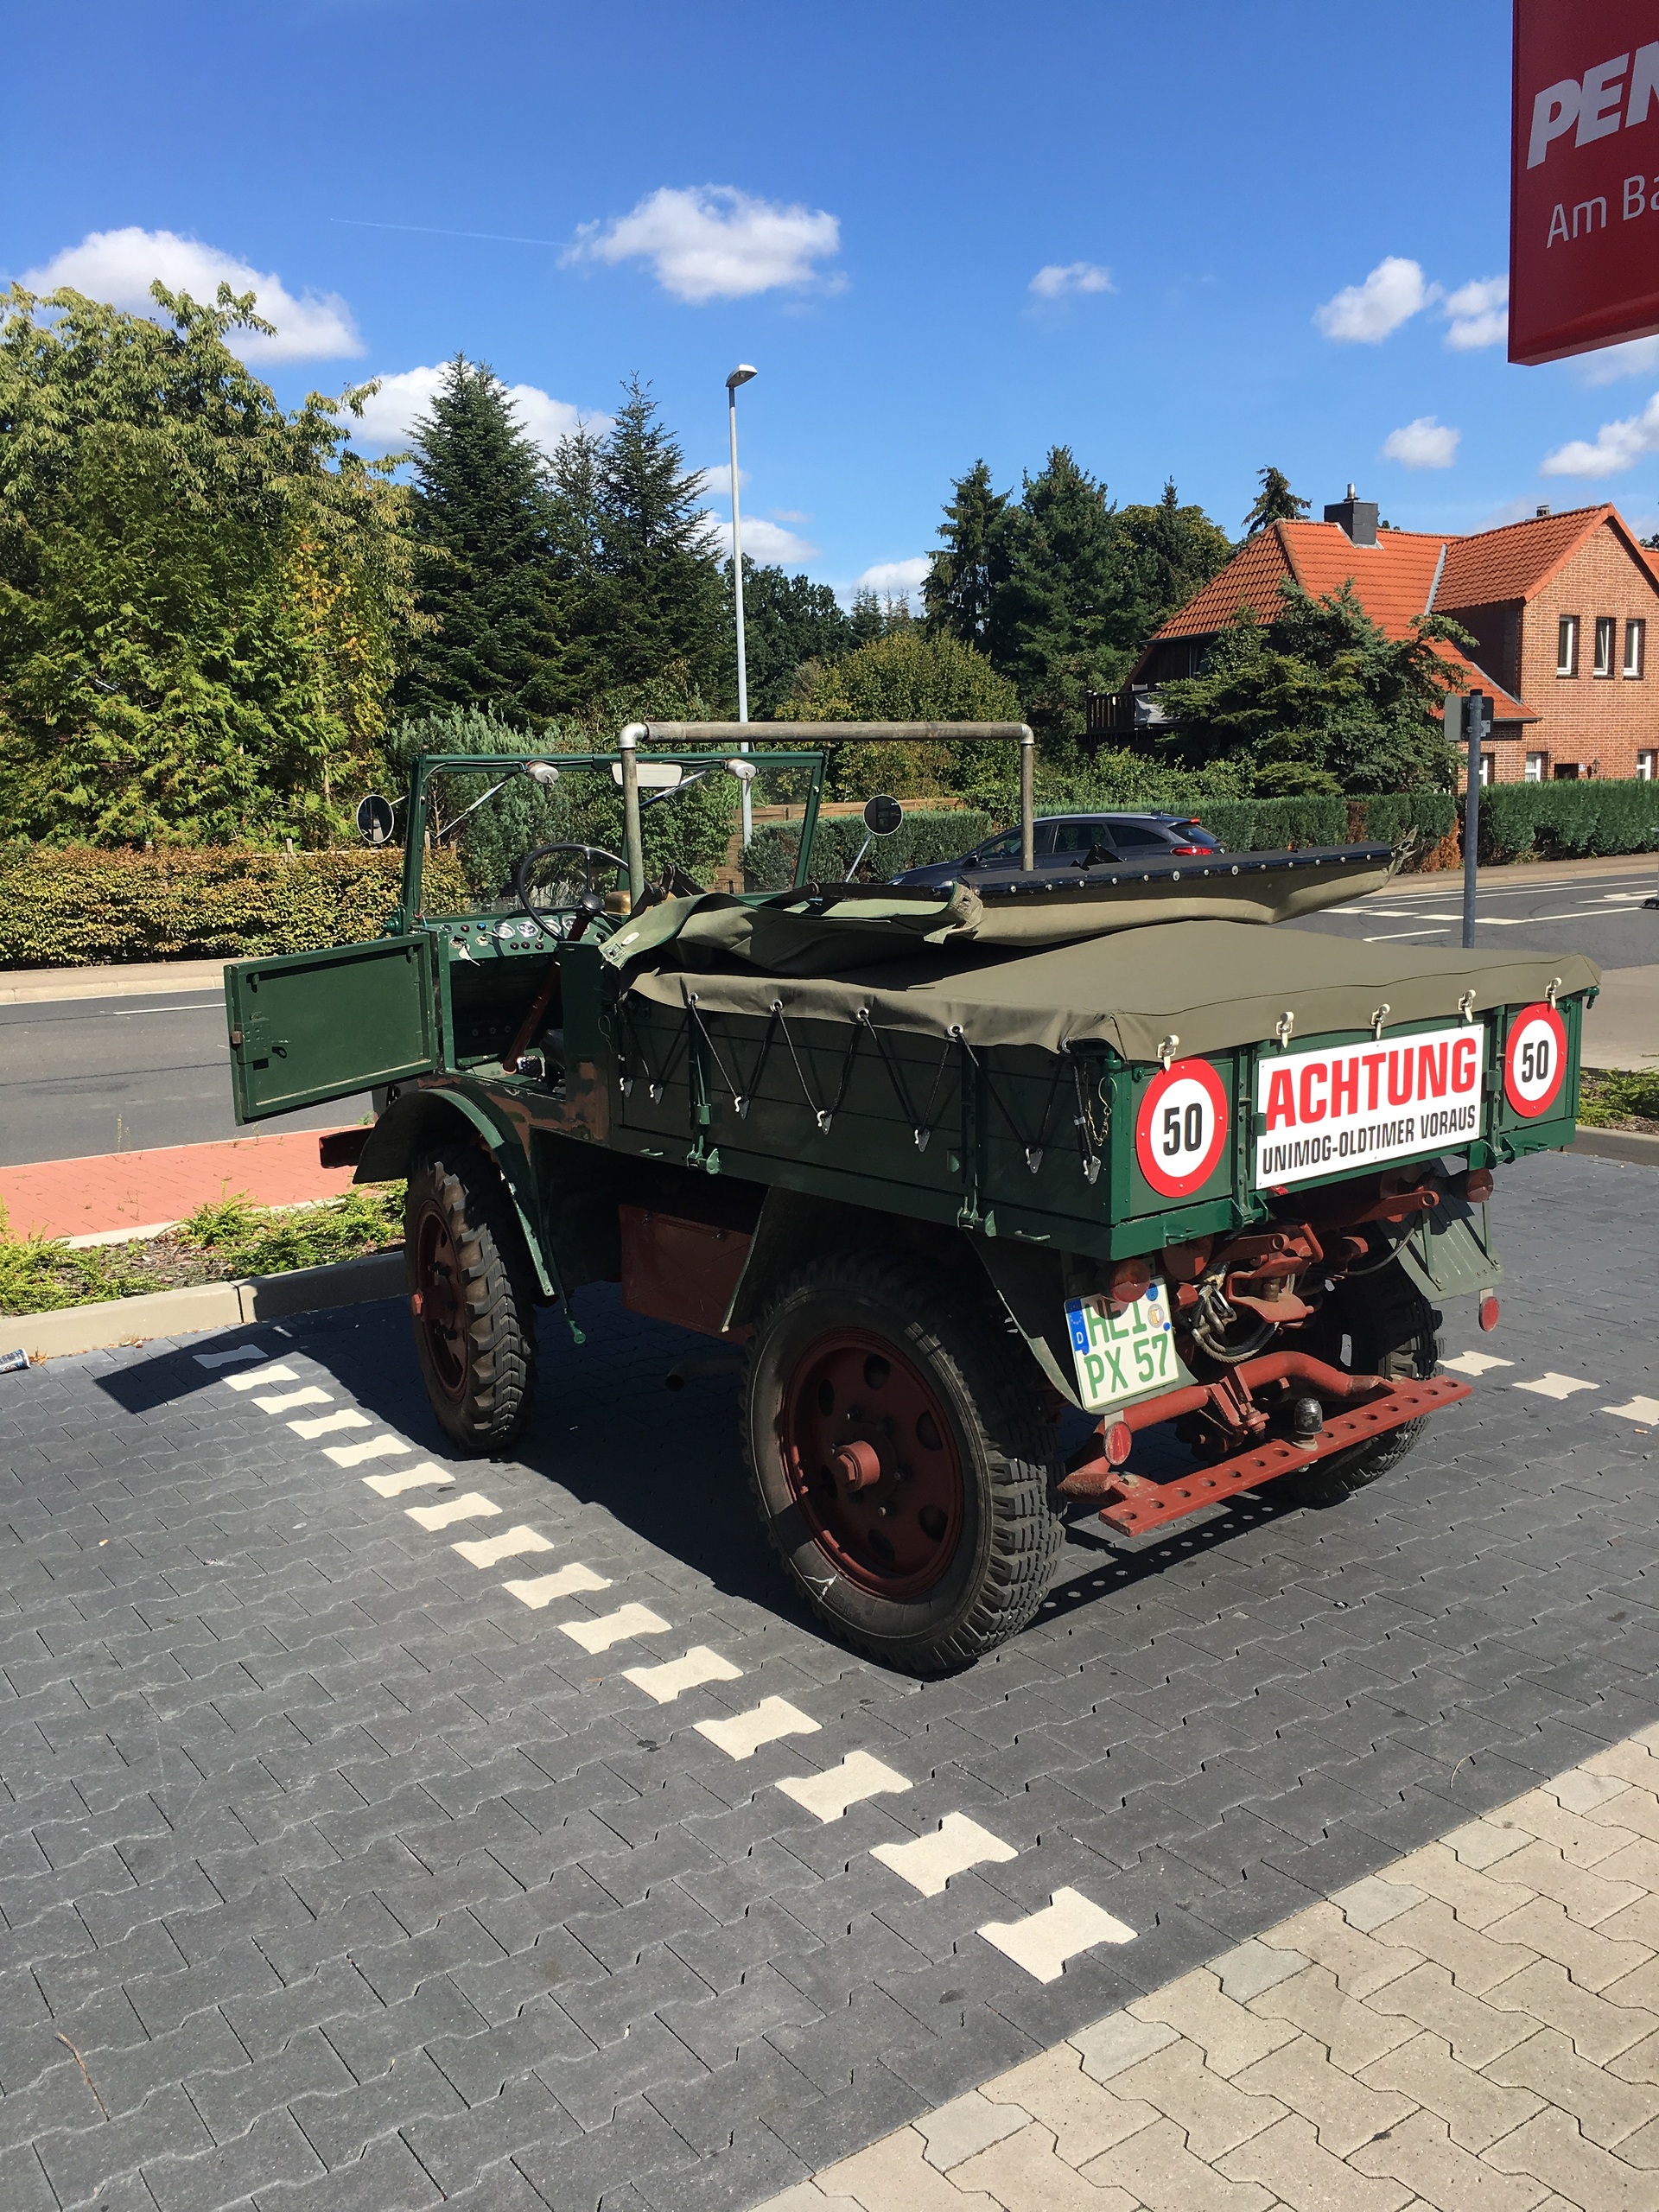 Unimog oldie on the road for a good cause